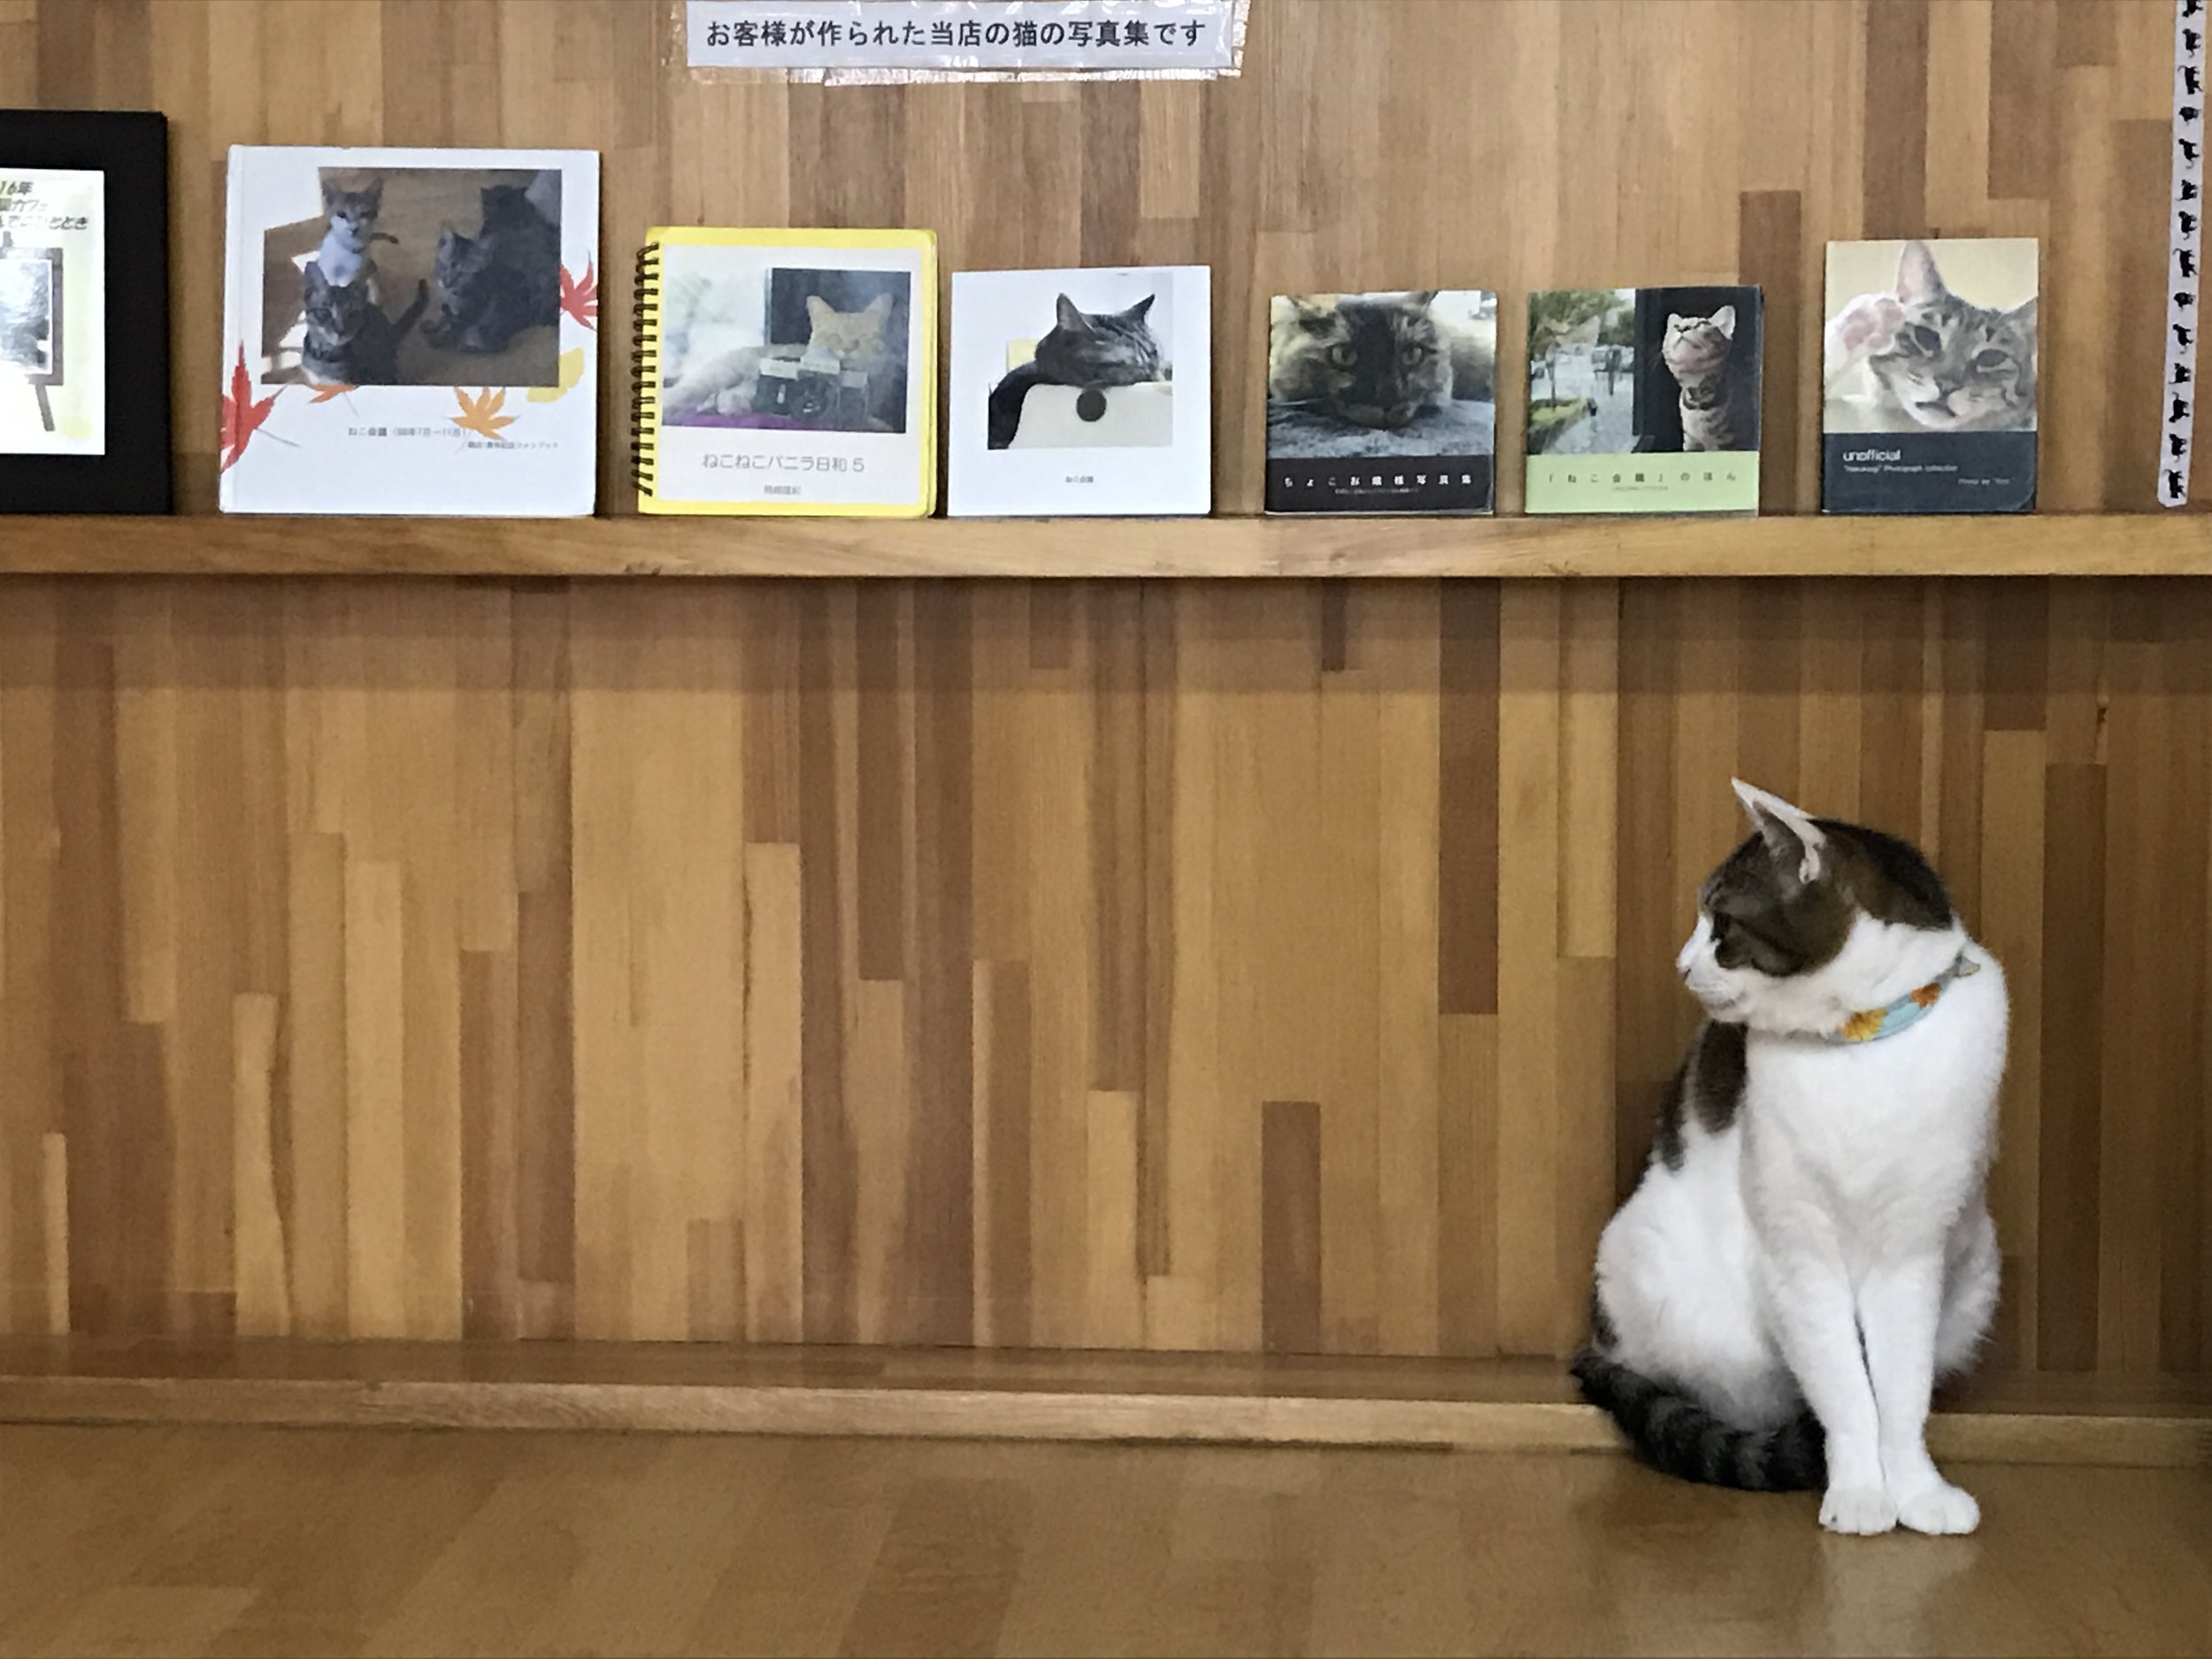 Cat Cafe Nekokaigi is spacious, clean and fresh with plenty of comfortable seating and a relaxed atmosphere